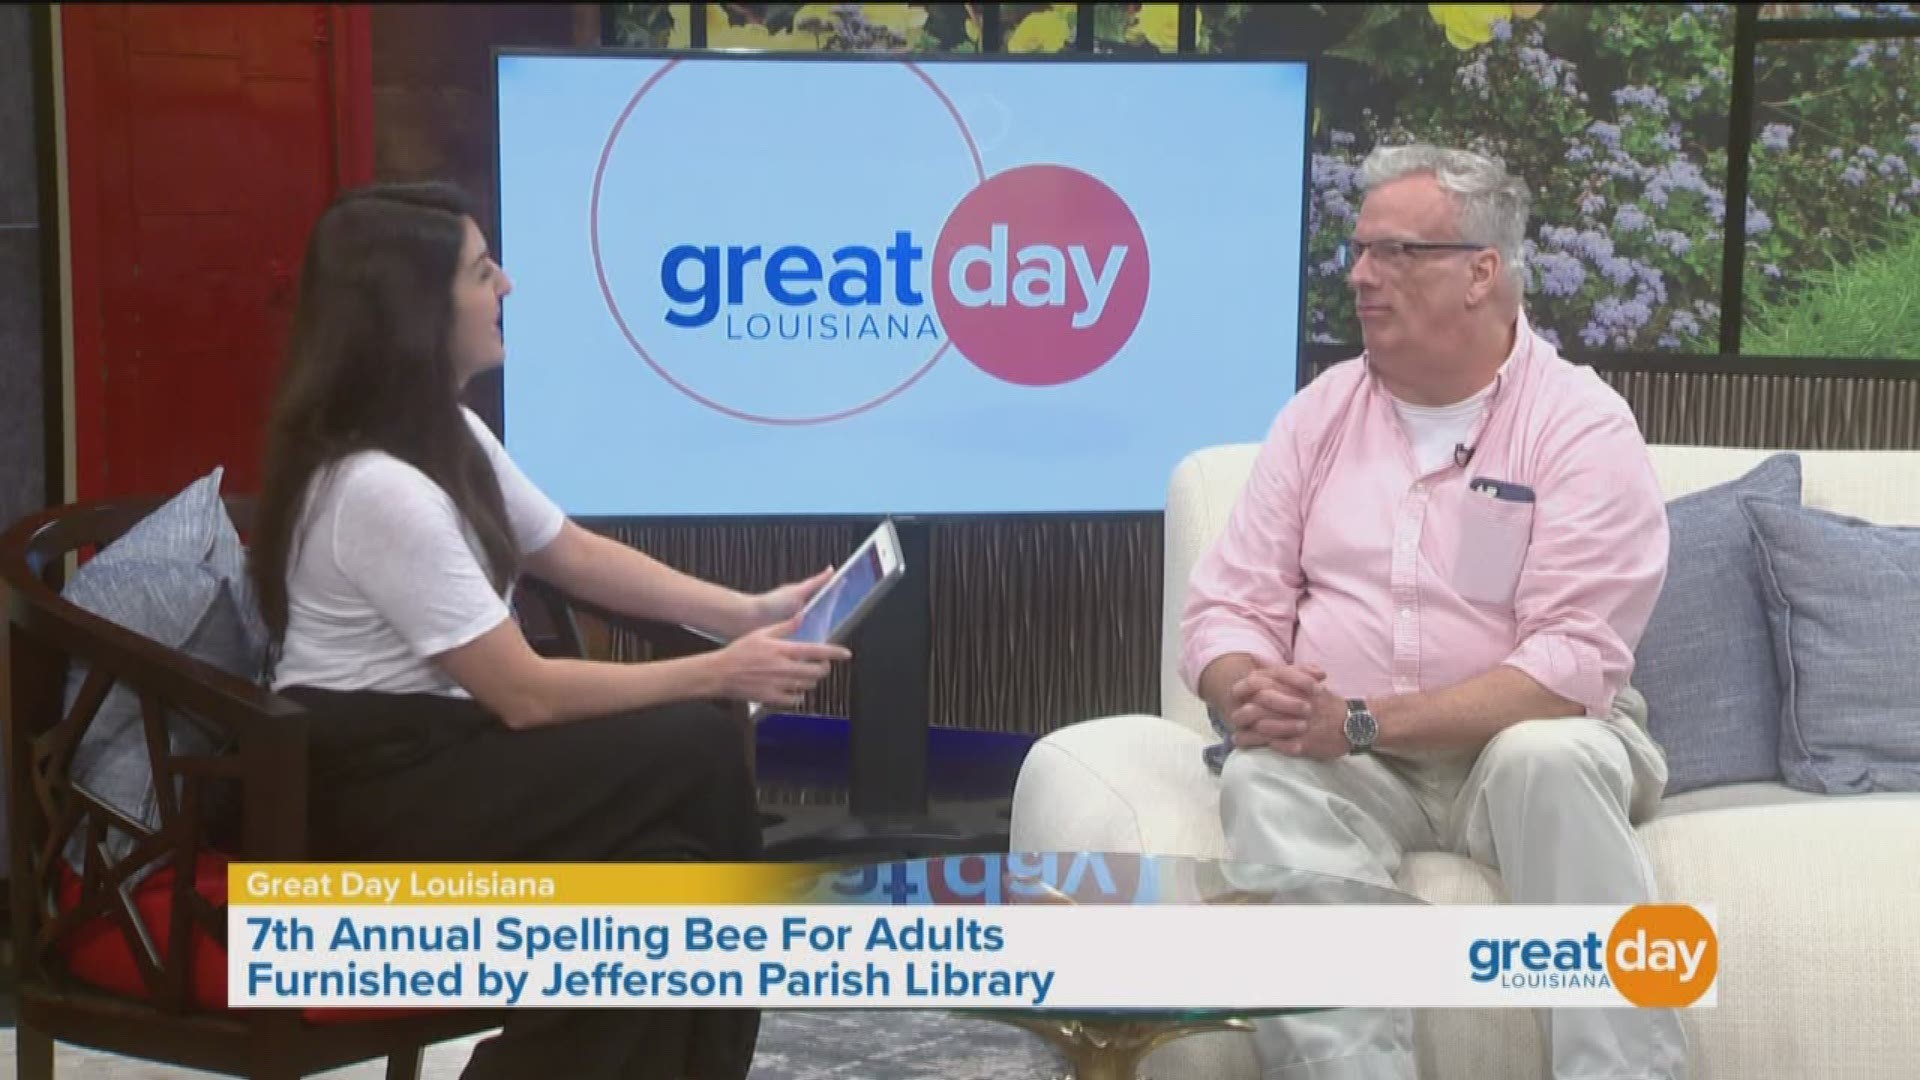 The 7th Annual Adult Spelling Bee coming to the Eastbank Regional Library in Metairie this Wednesday, July 17th at 7pm. Here to tell us more about it is Chris Smith with the Jefferson Parish Library. Go to JPLibrary.net for more information.